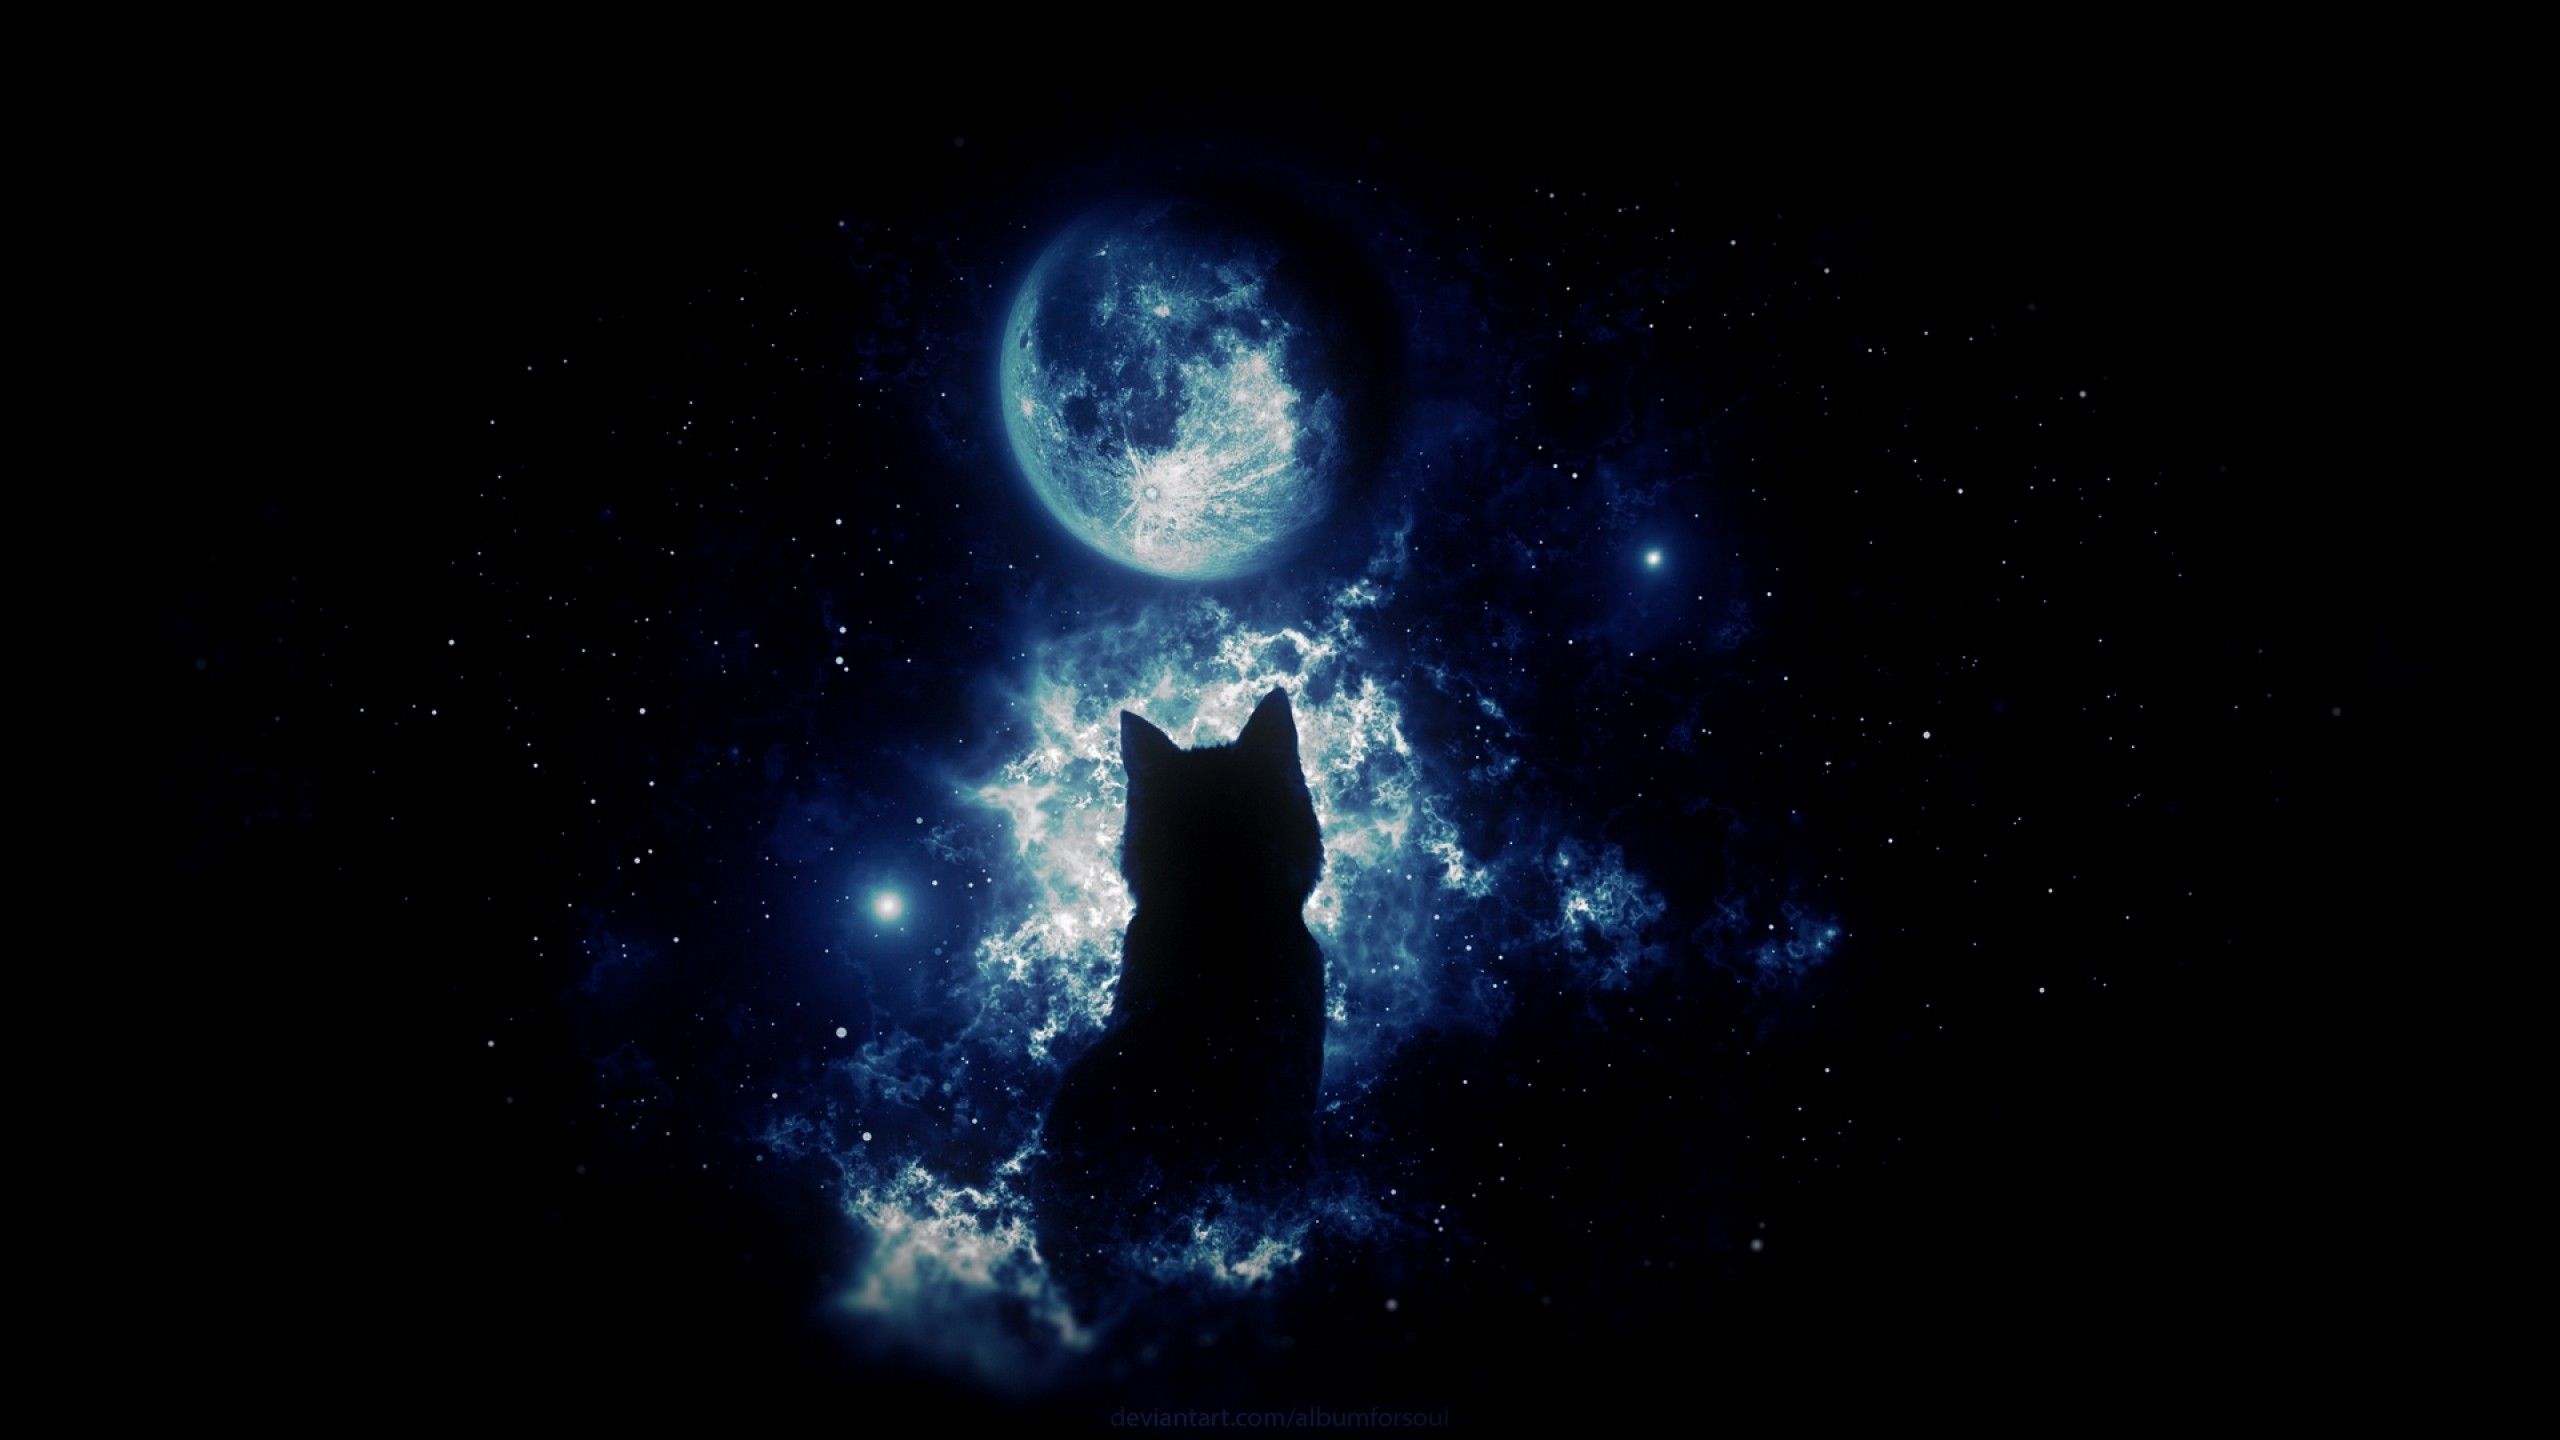 Anime cat staring at the moon HD Wallpaper Youtube Cover Photo